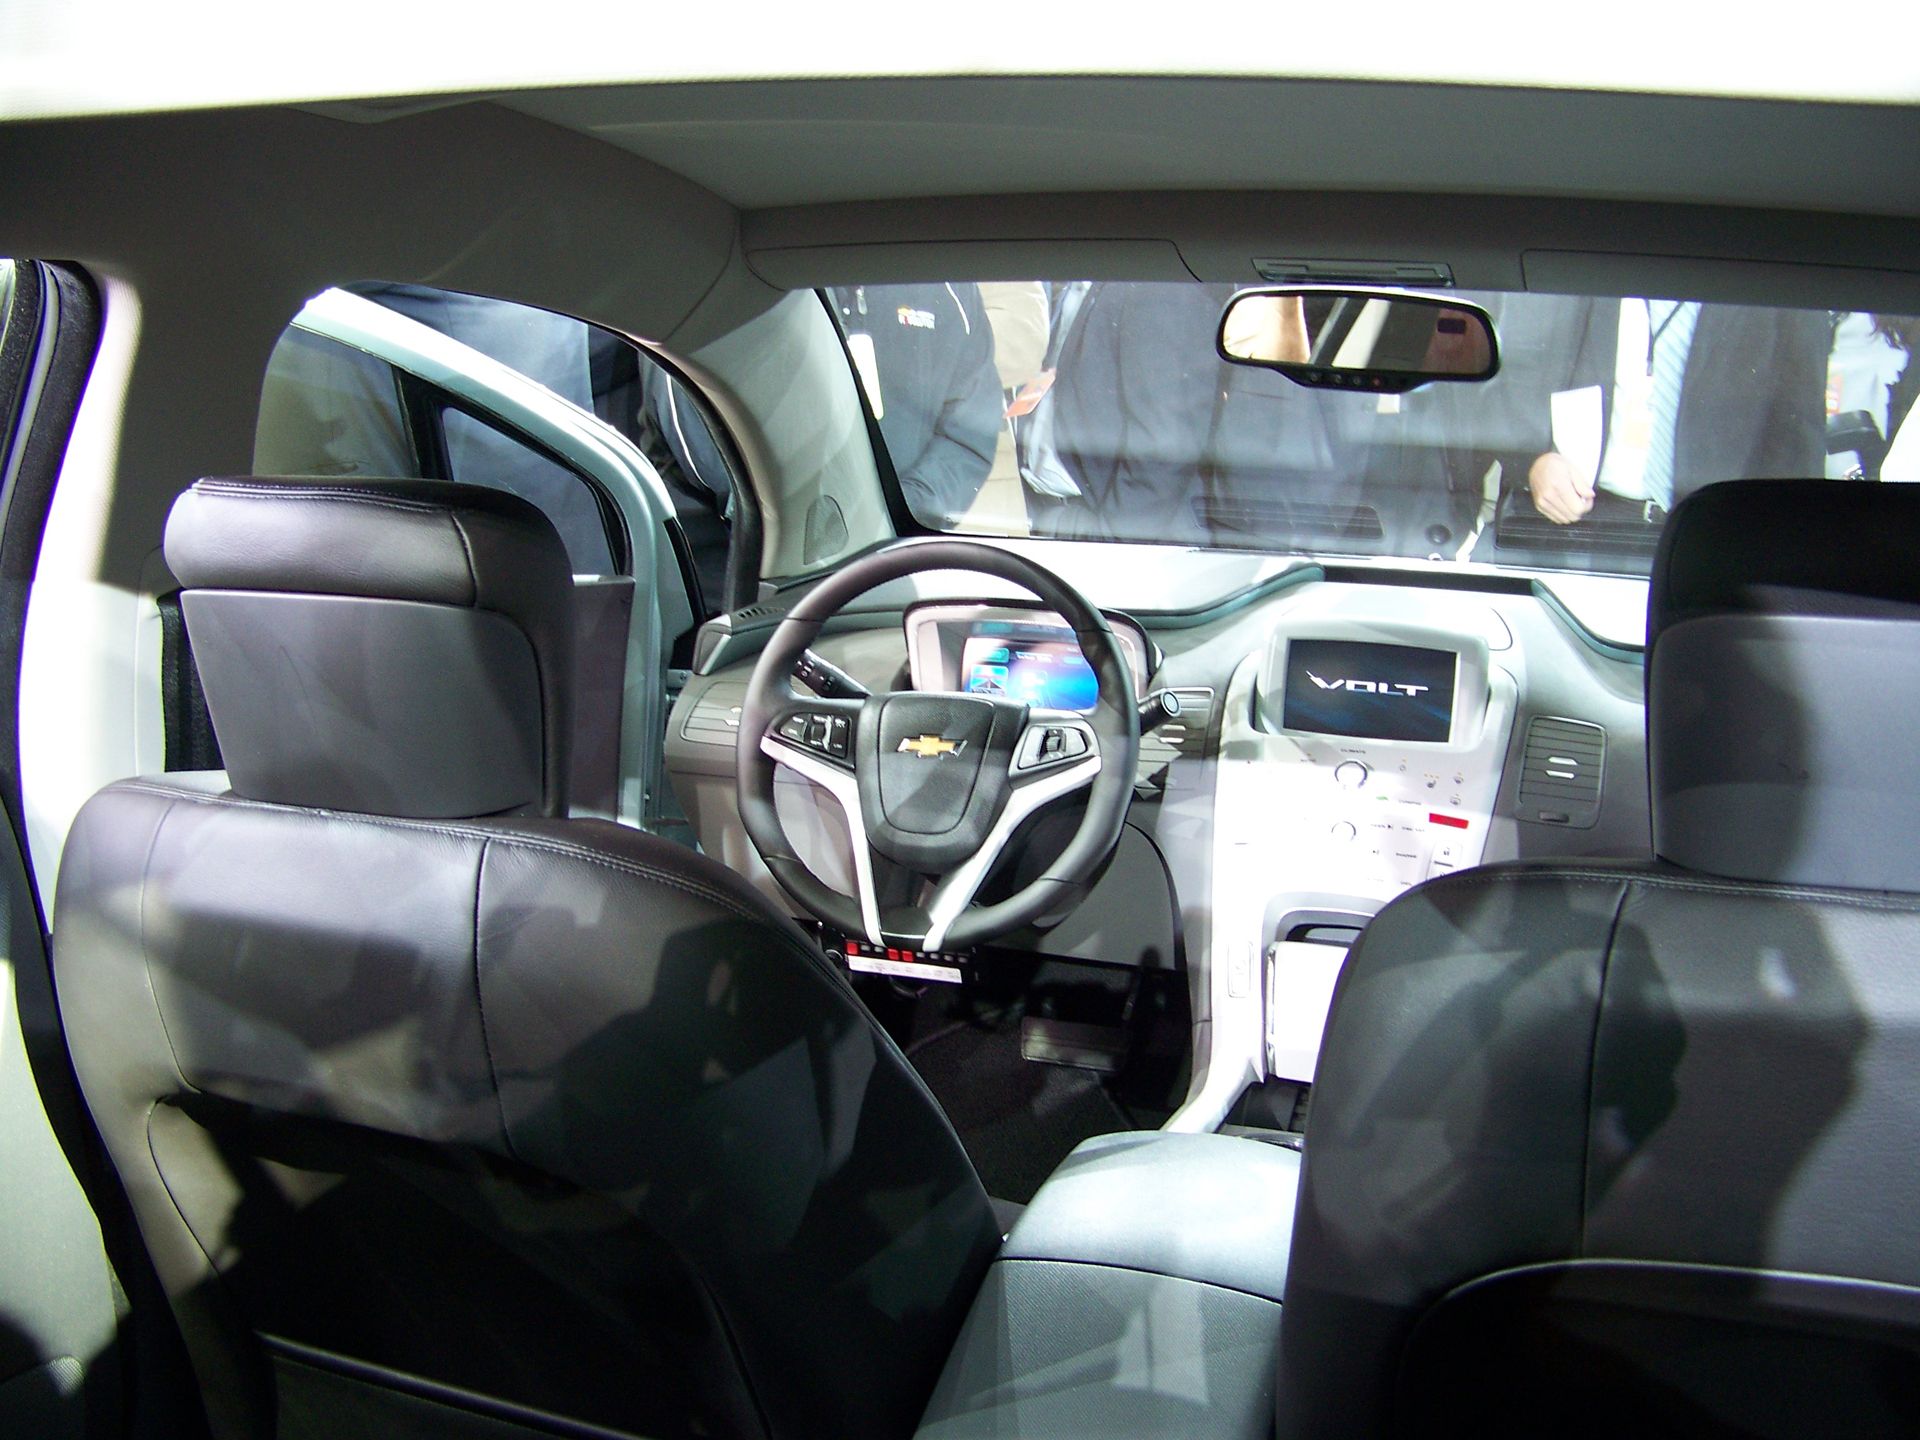 2011 Chevrolet Volt: after the hype, here is the breakdown